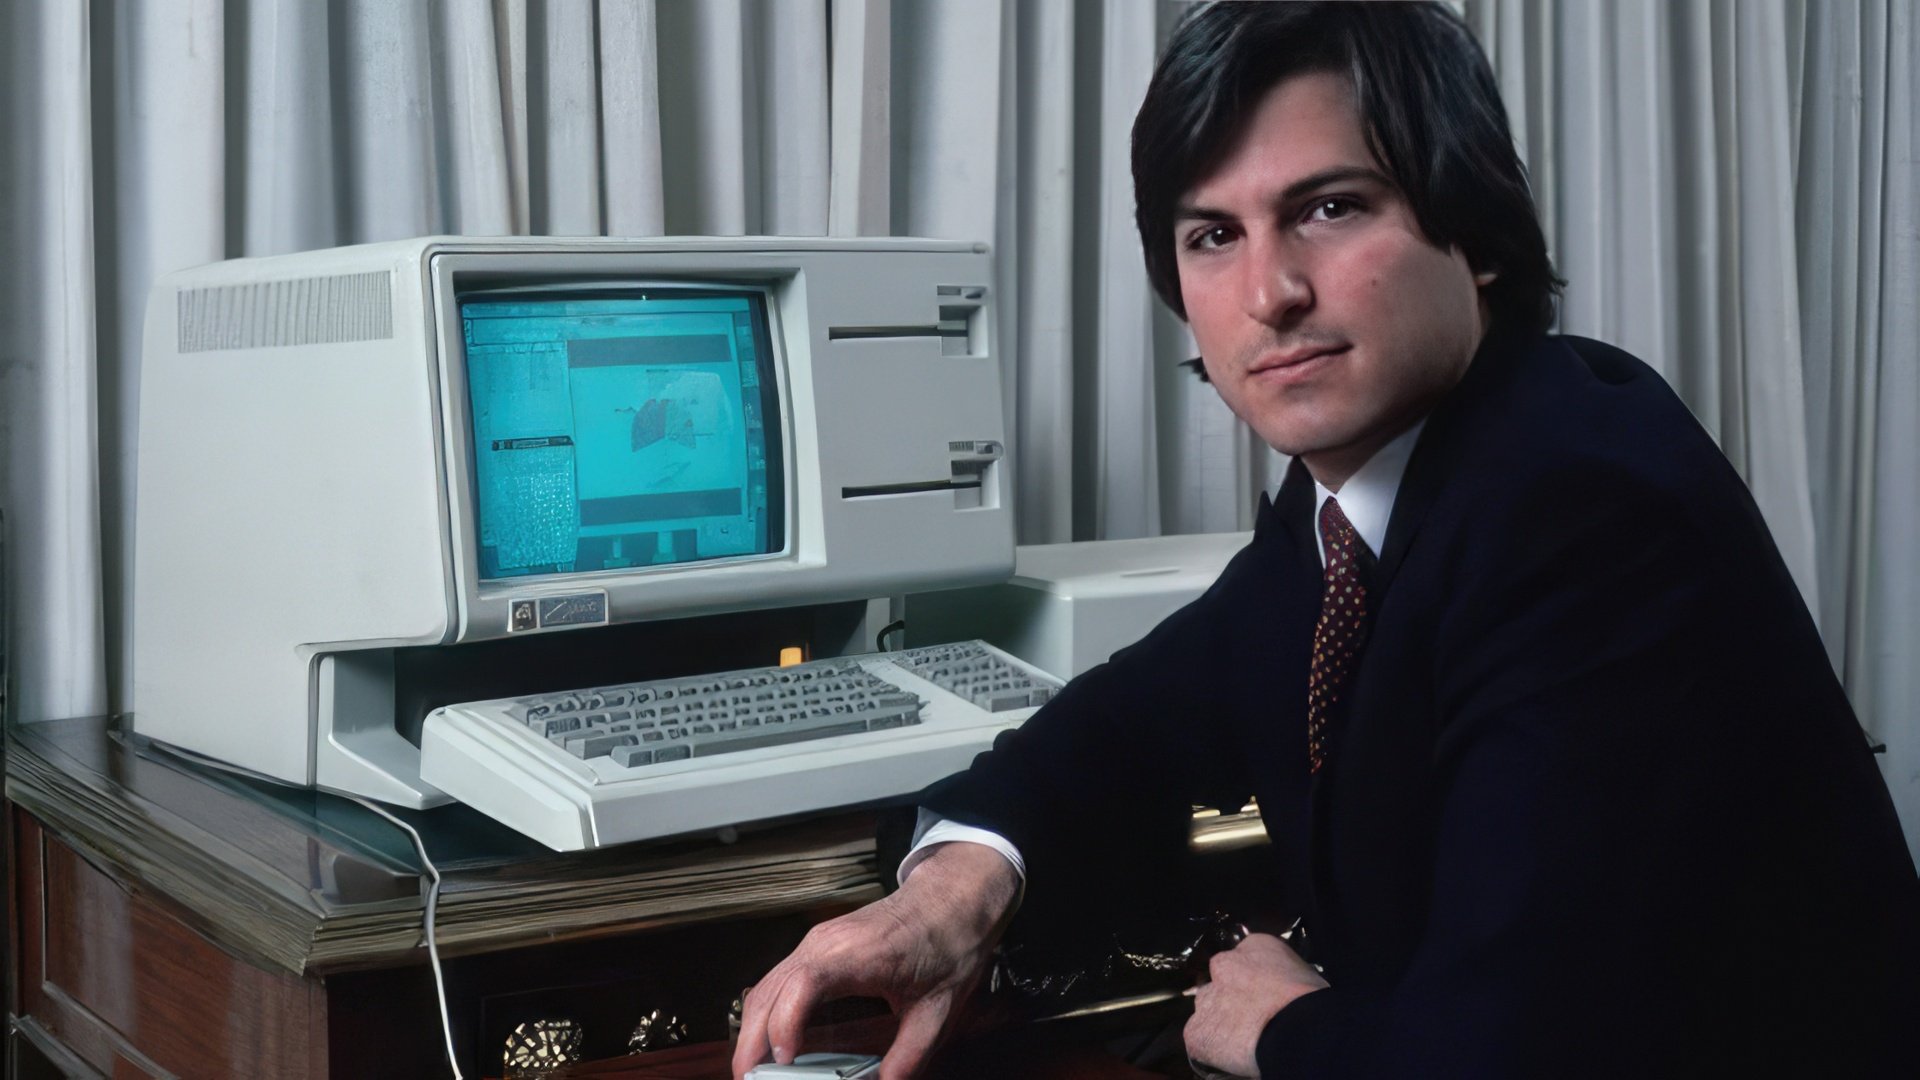 Steve Jobs became a millionaire by the age of 25